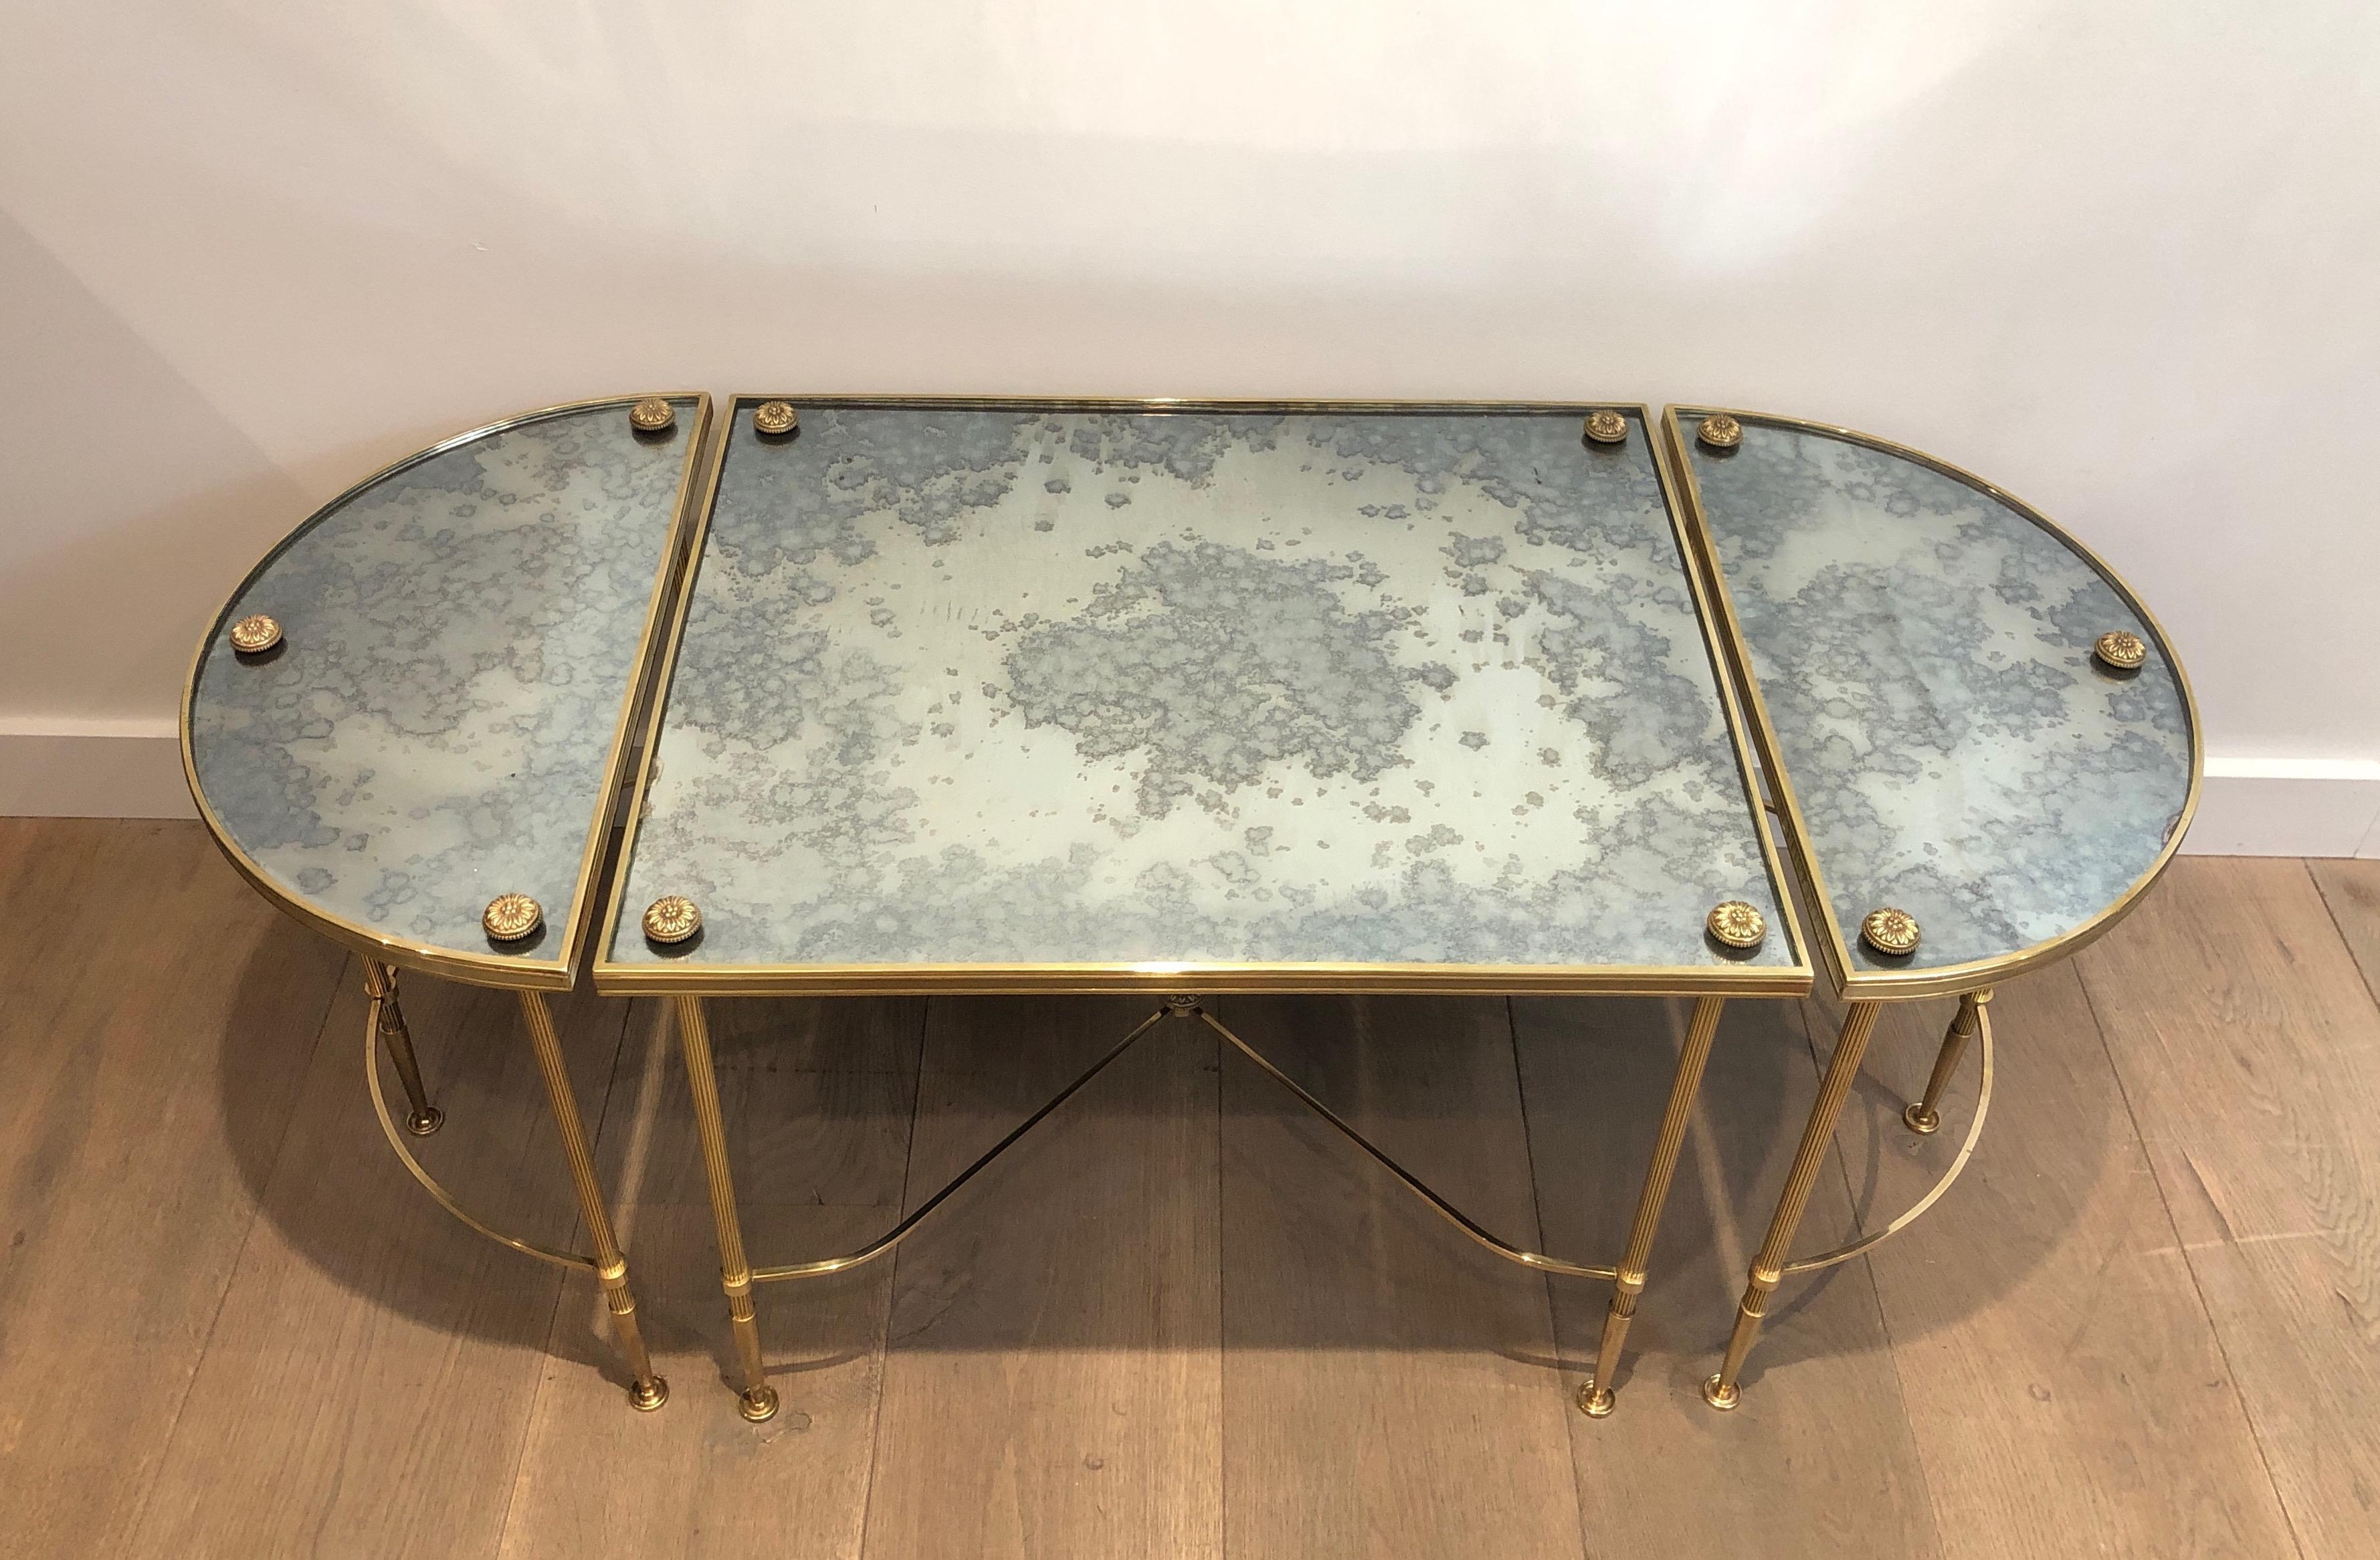 This tripartite coffee table is made of a main rectangular table and 2 matching rounded side tables. This cocktail table is all made of brass with original eglomized mirror top. This is a work by famous French Designer Maison Baguès.